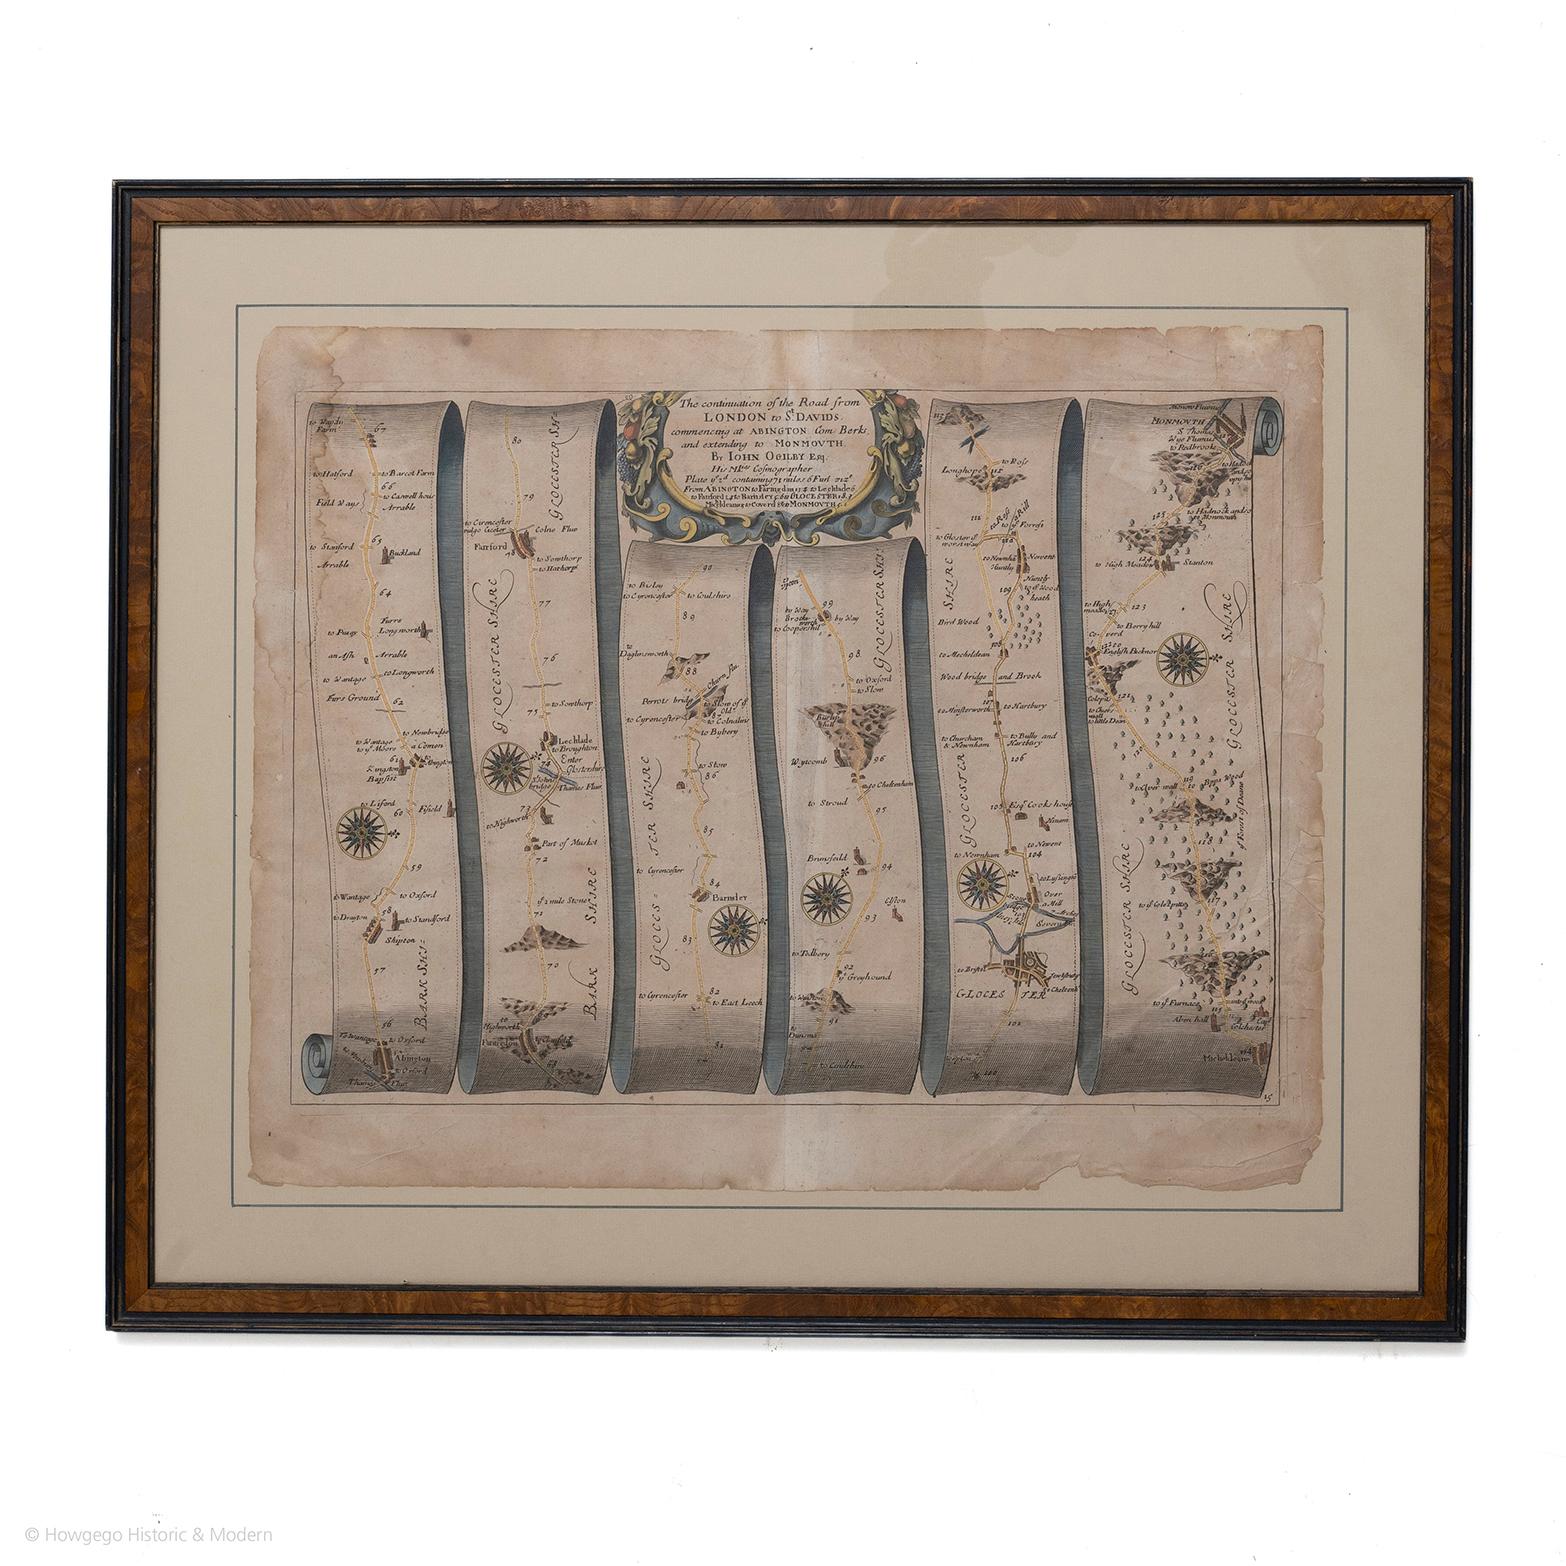 John Ogilby (British 1600-1676) Cosmographer and Geographick Printer to Charles II. A road map from Britannia, 1675/6. No 15. 

The continuation of the road from London to St Davids, commencing at Abingdon Com Berks and extending to Monmouth By